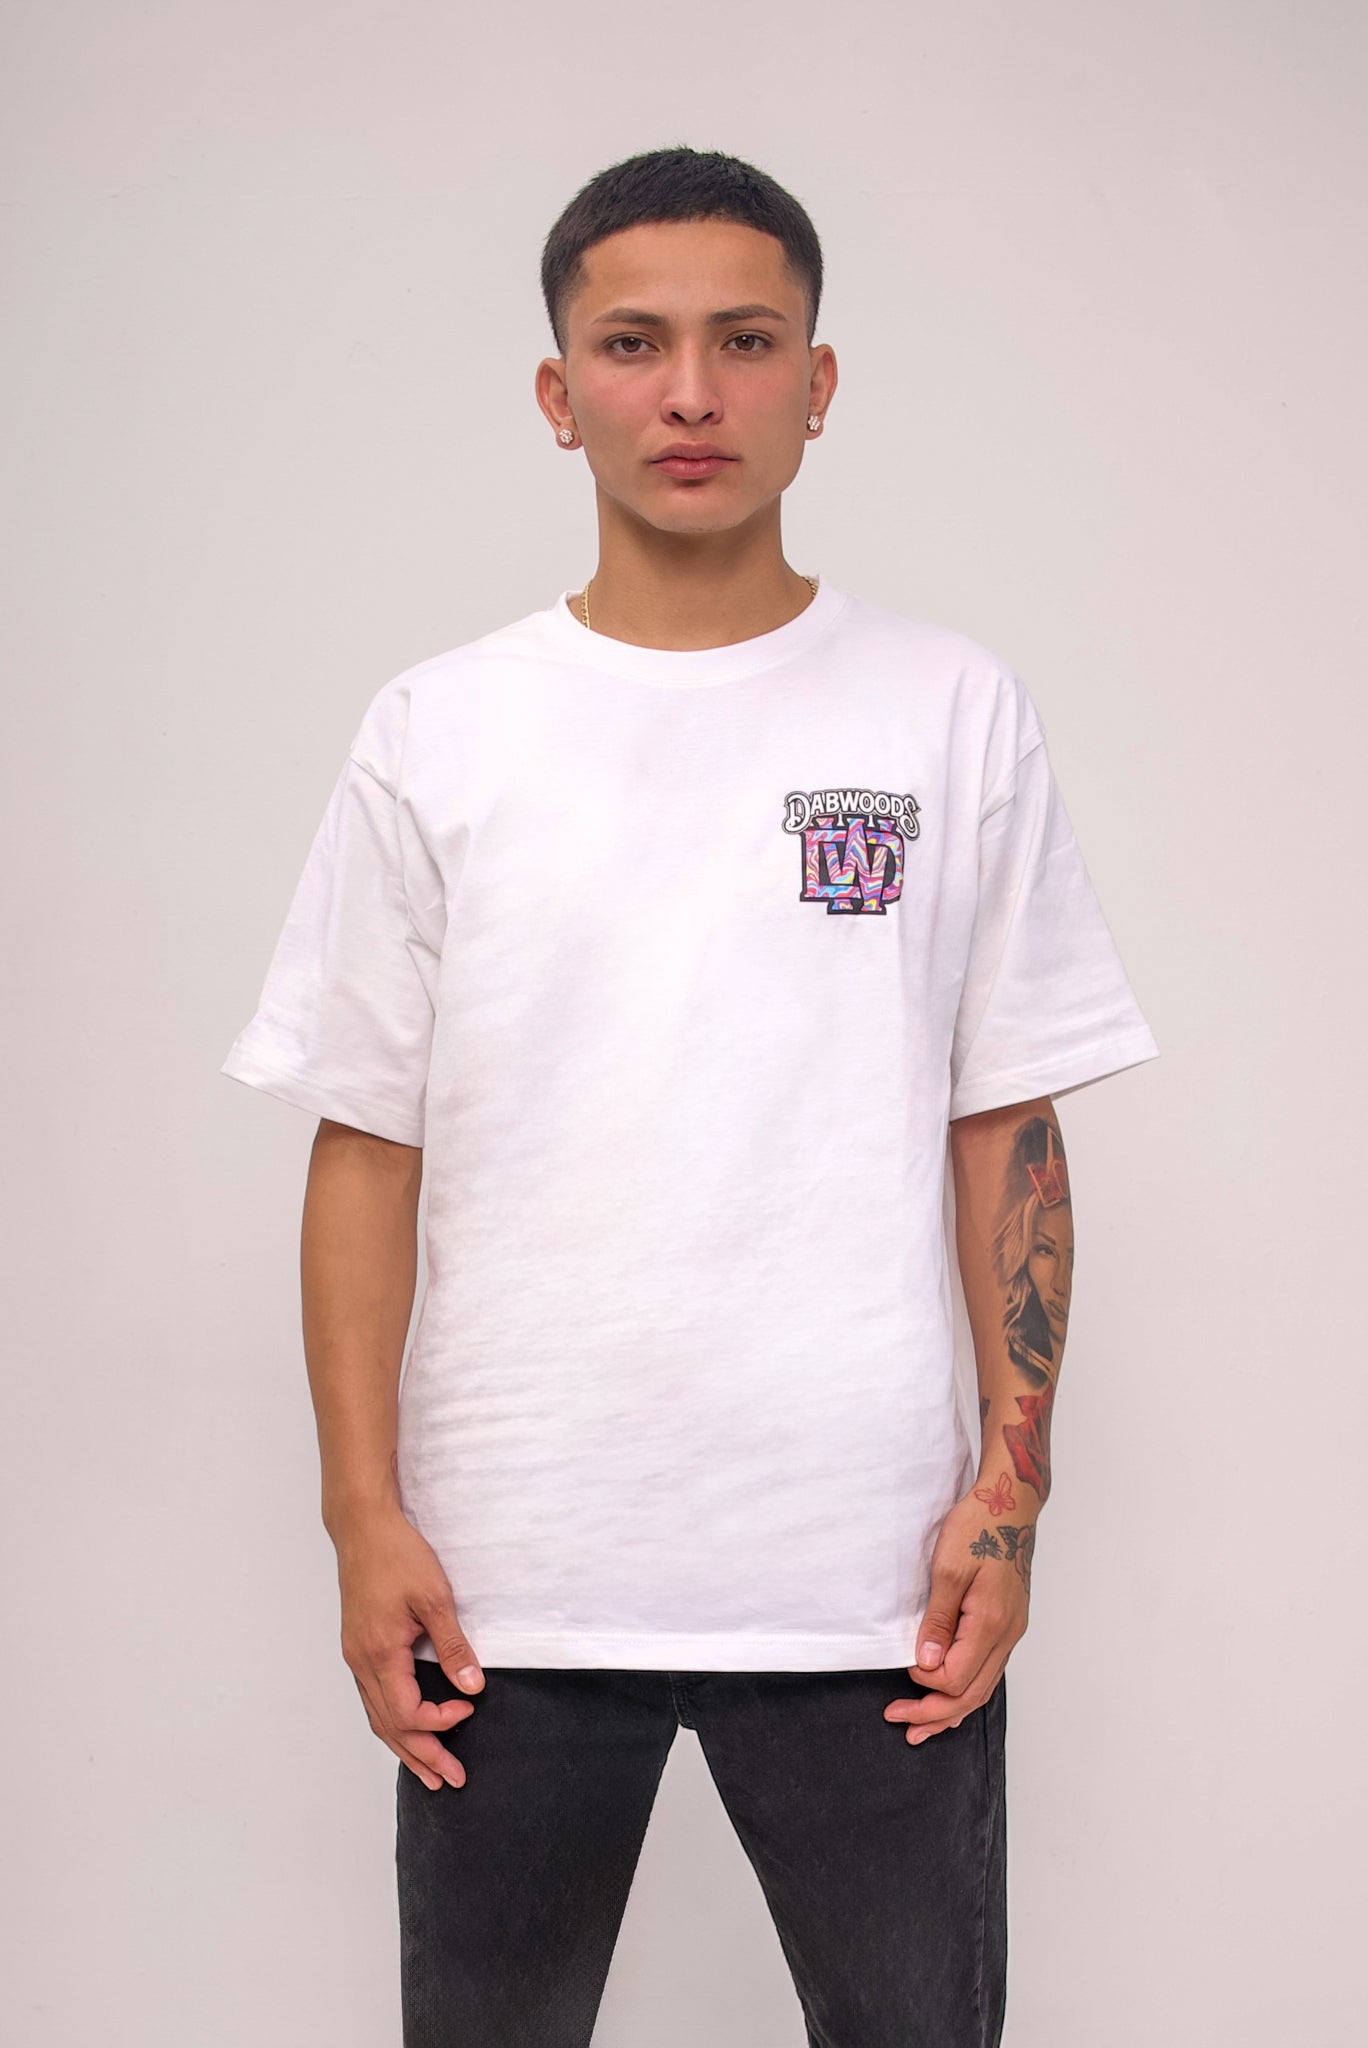 DABWOODS MELTED TEE